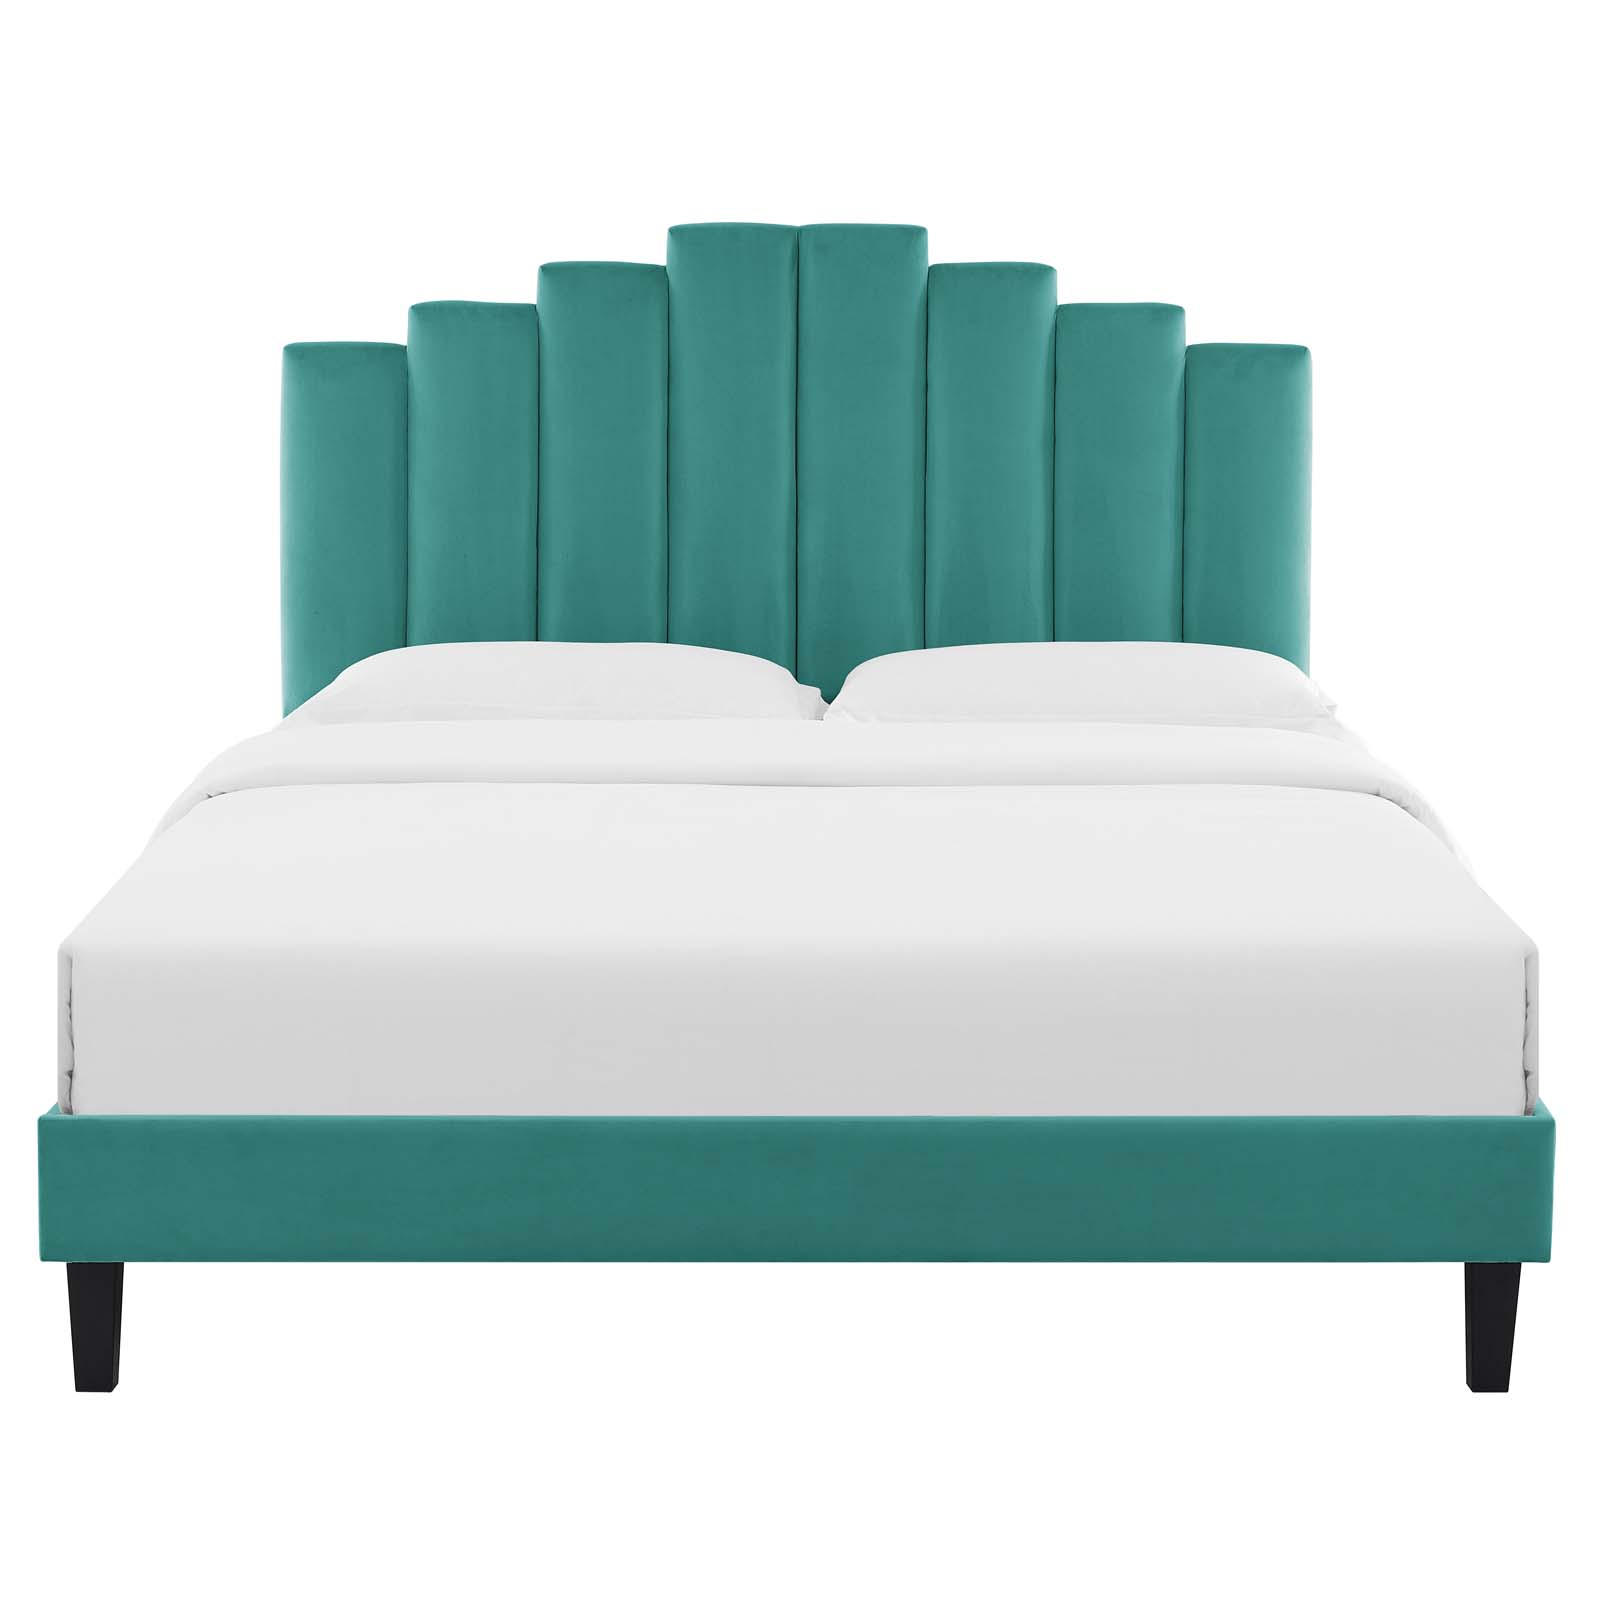 Modway Imports Elise Twin Performance, Teal Twin Bed Frame